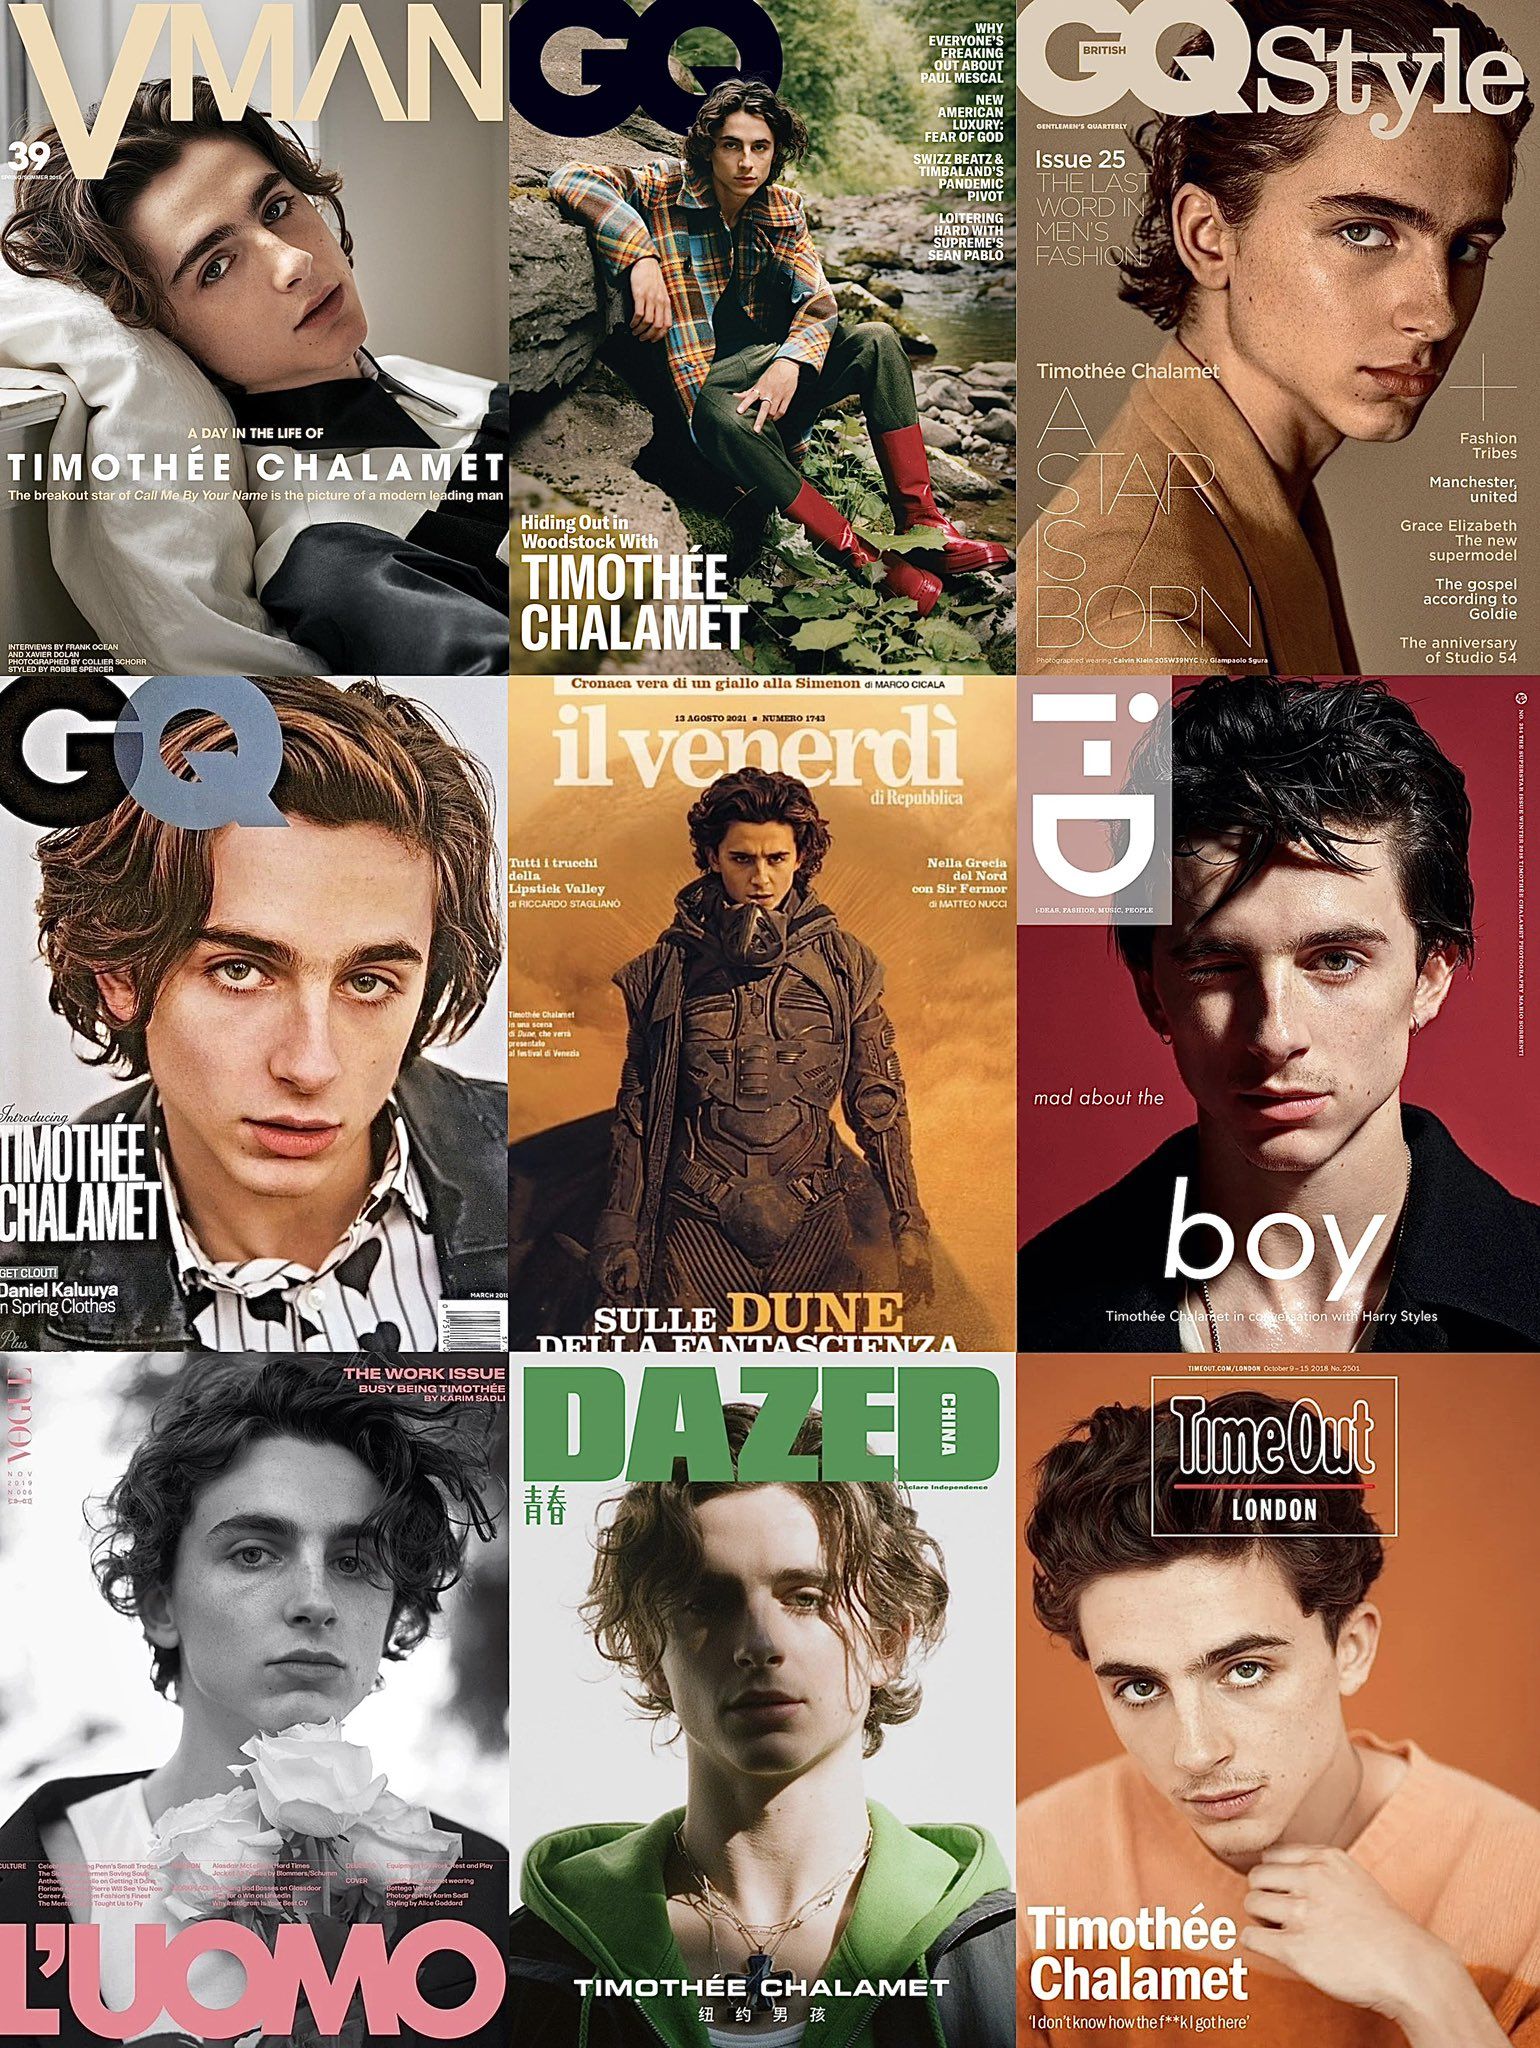 A collage of magazine covers featuring Timothee Chalamet. - Timothee Chalamet